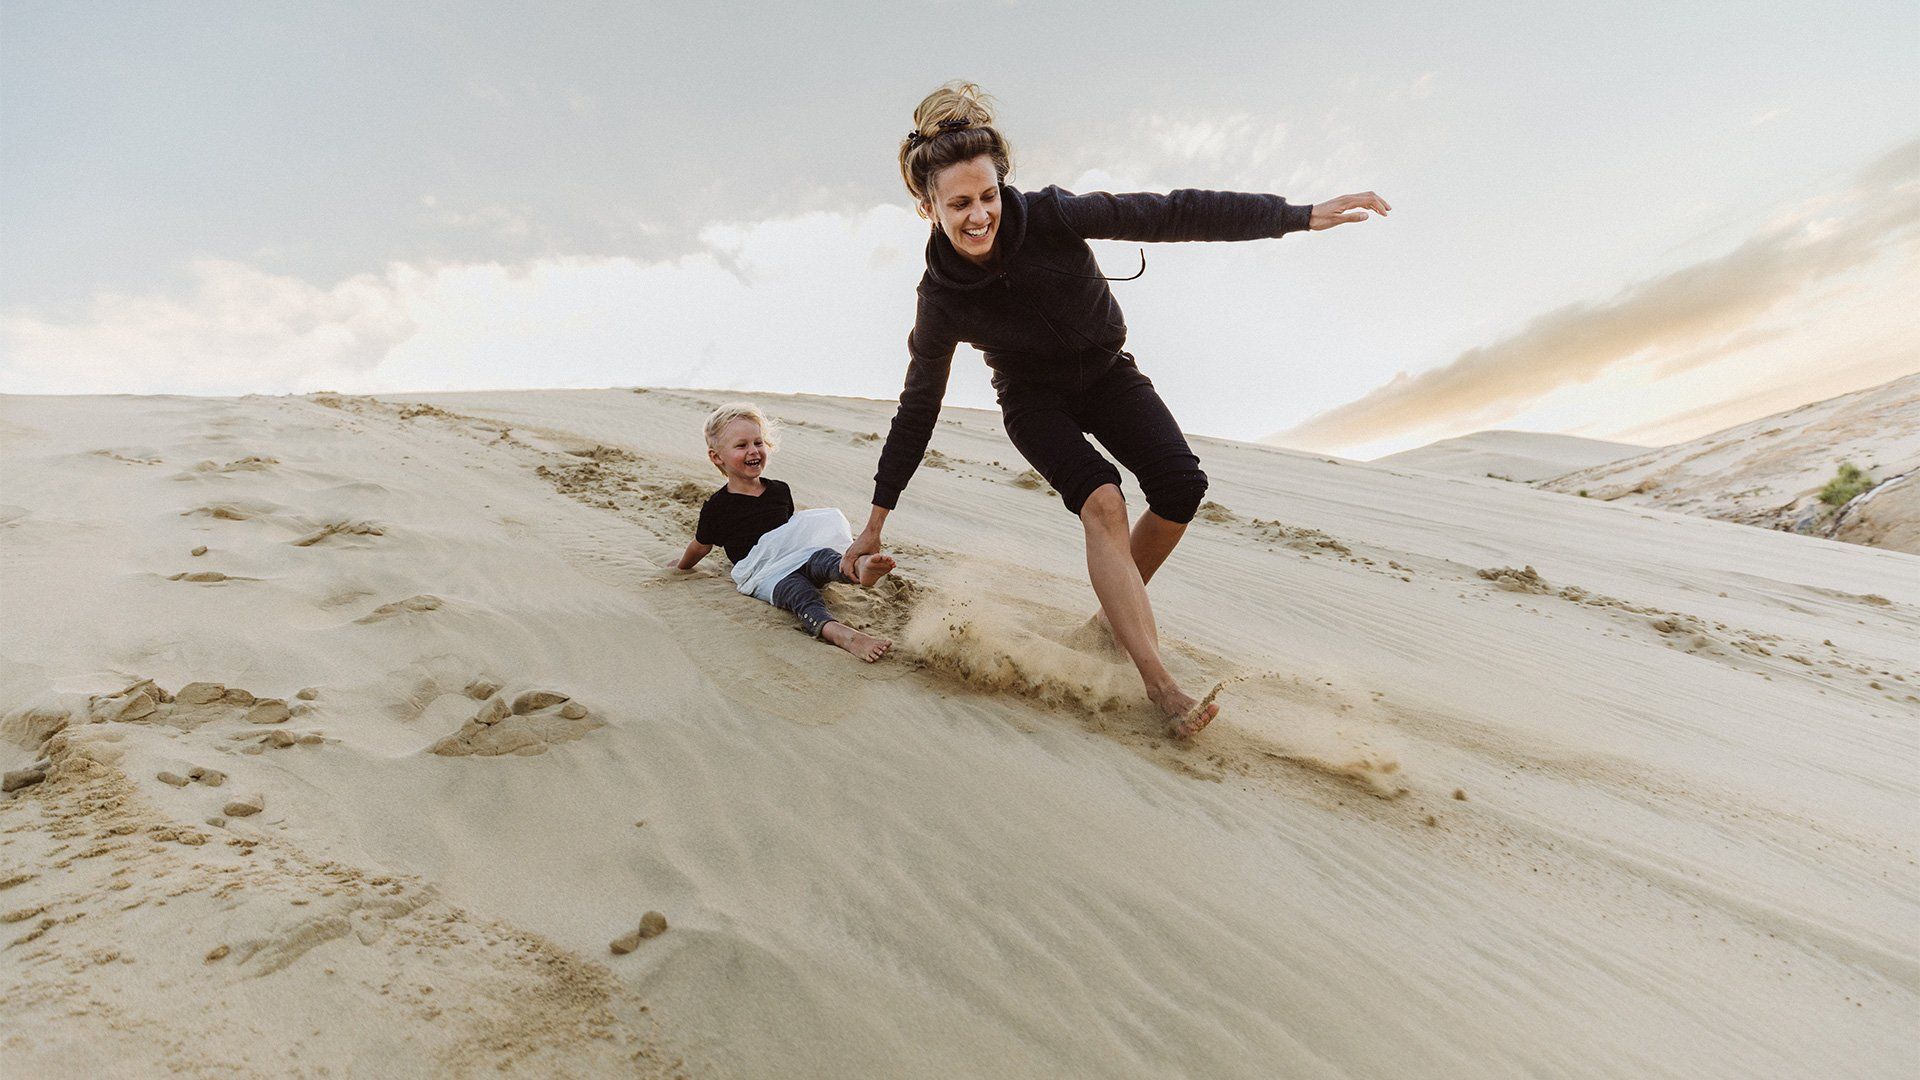 A mother runs down a sand dune, pulling her son along, both of them laughing. Photo by Christian Anderl.